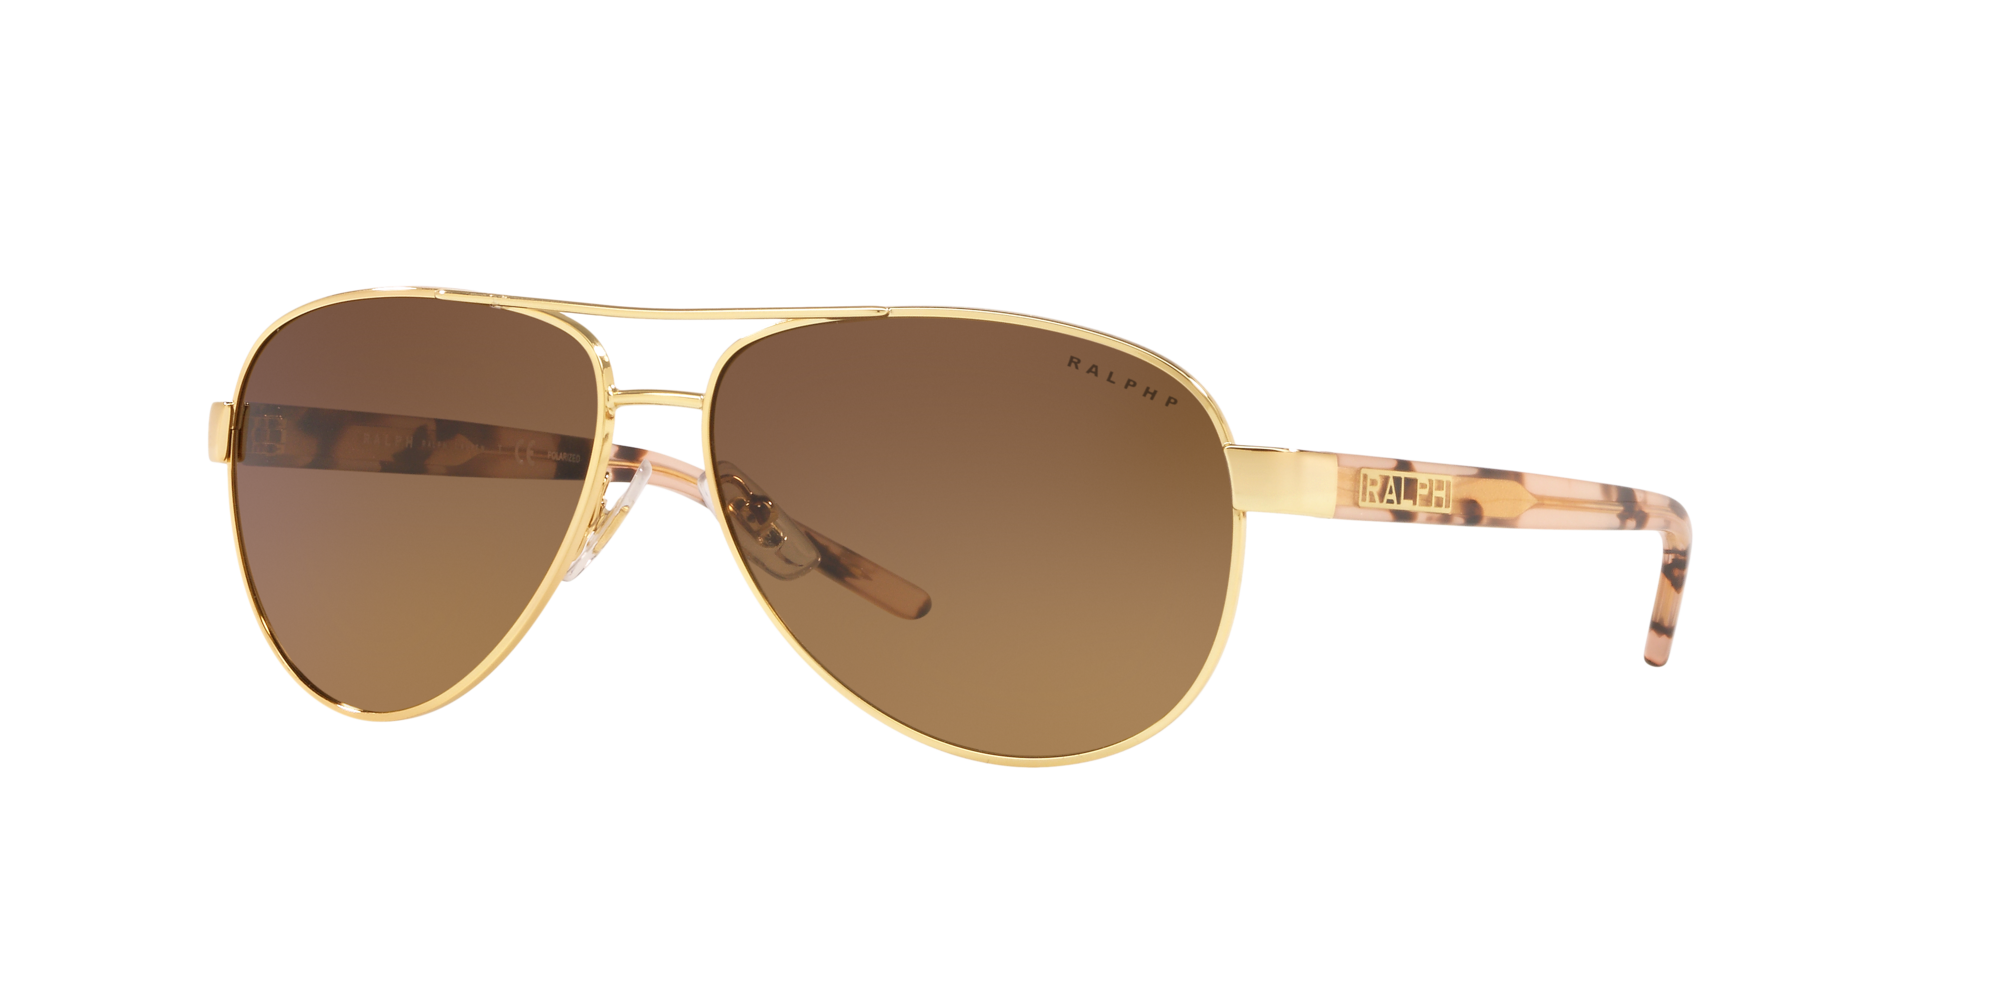 [products.image.angle_left01] Ralph Lauren 0RA4004 9411T5 Sonnenbrille